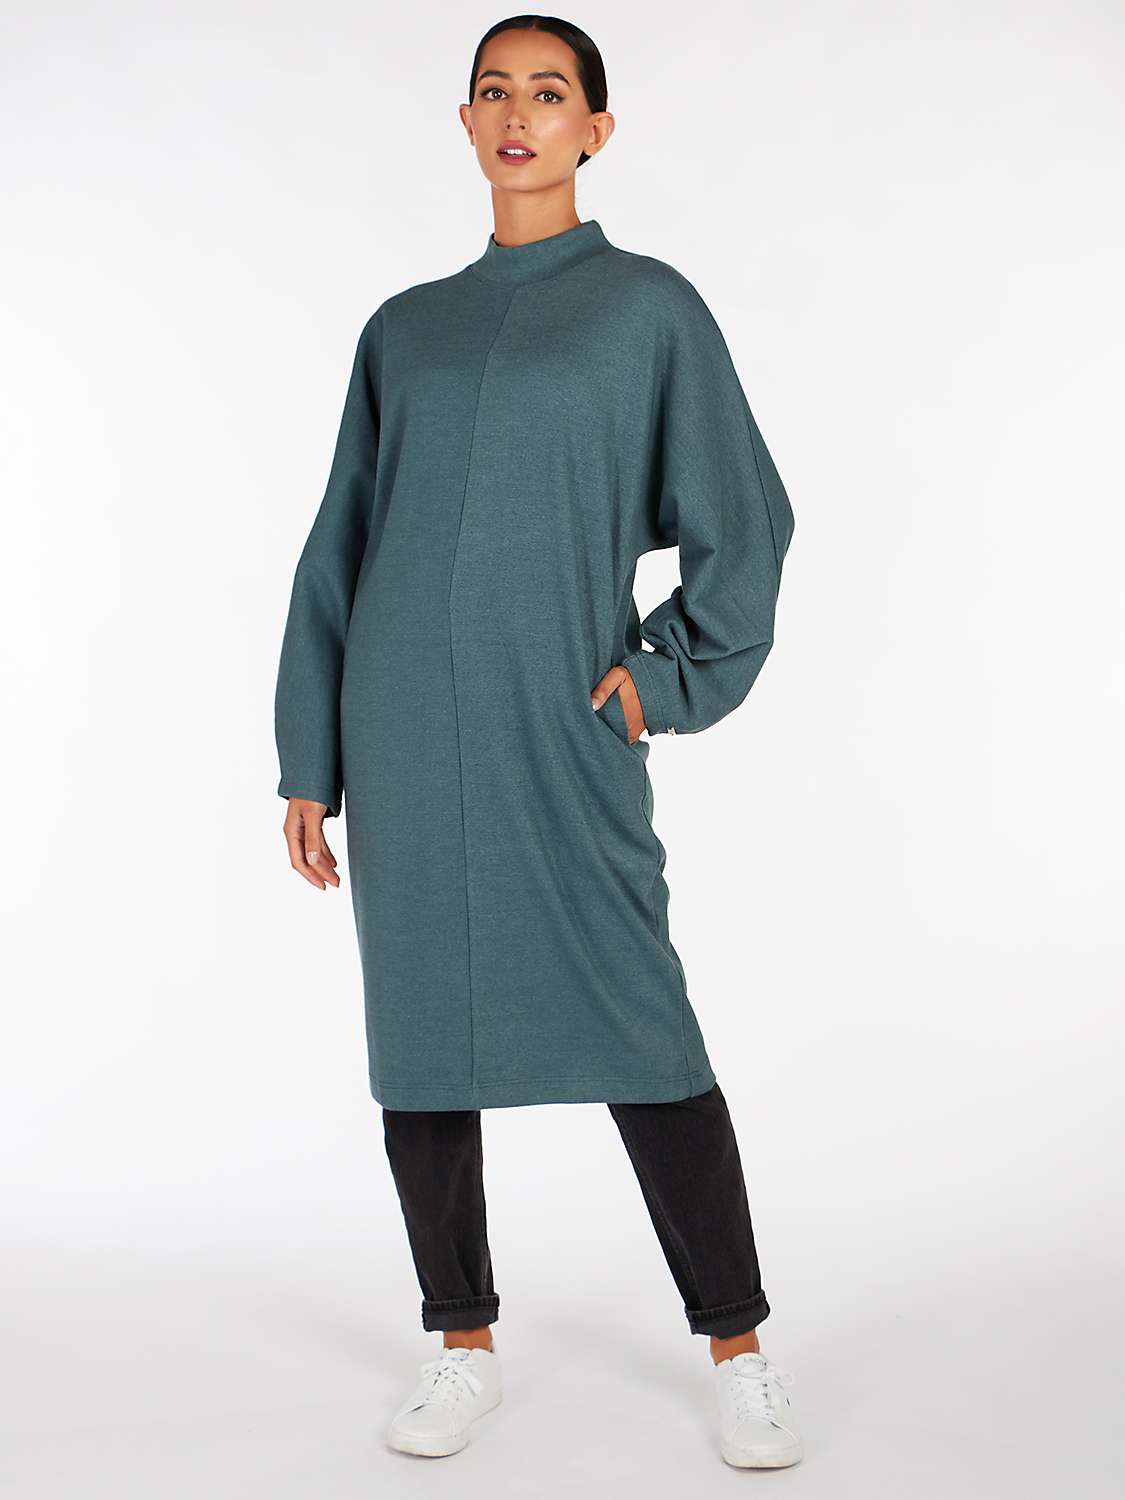 Buy Aab Loose Fit Knit Midi Dress Online at johnlewis.com